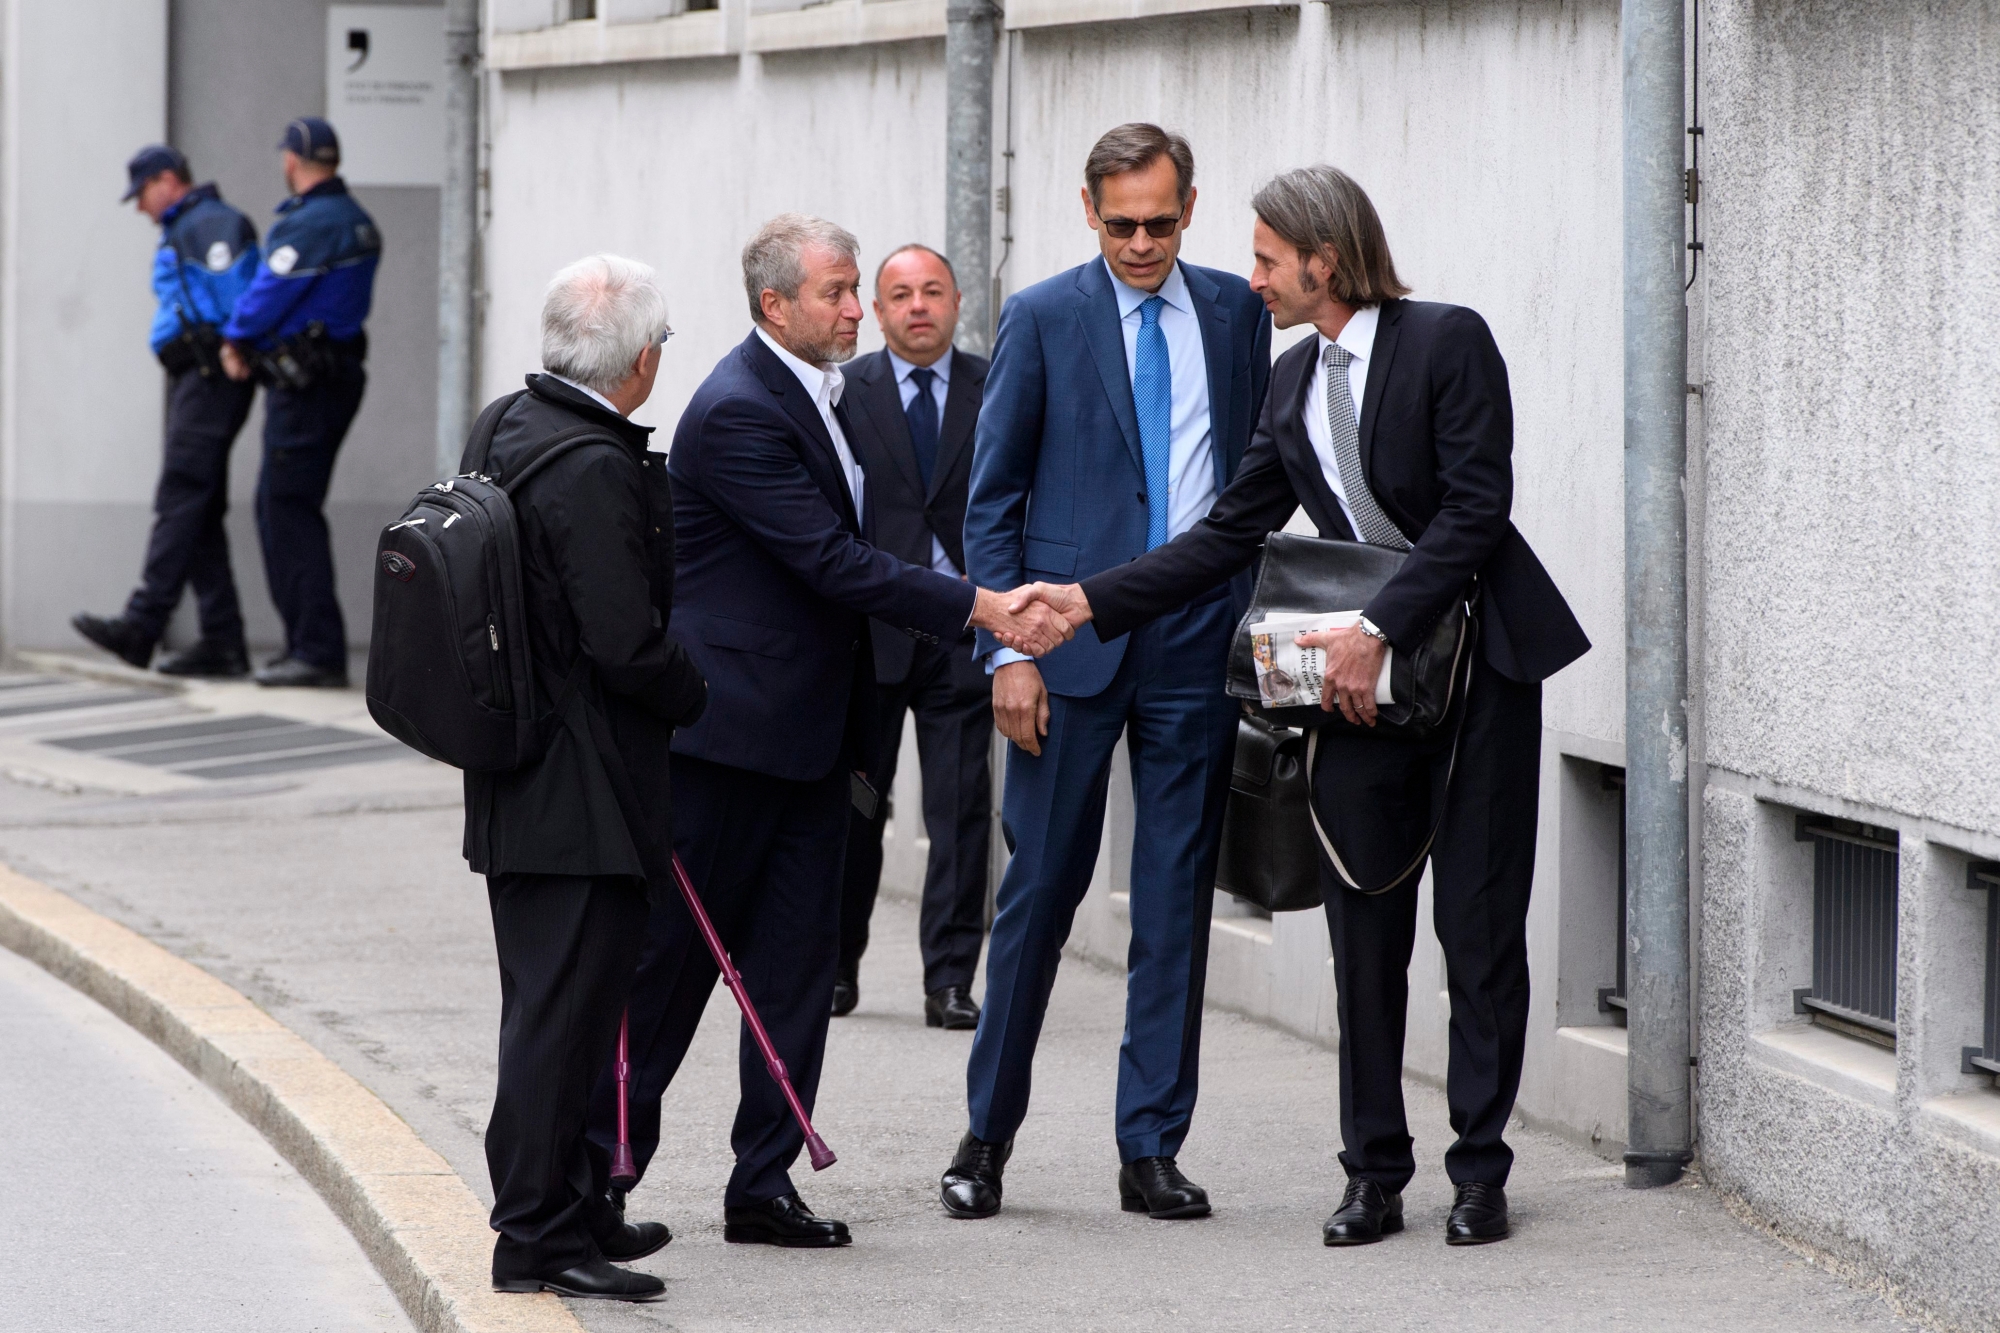 Dominique Dreyer, lawyer, left, the Russian oligarch Roman Abramovich, second-left, and Andre De Cort, lawyer, second-right, and Markus Jungo, lawyer, right, arrive at the opening of the civil proceedings brought by the European Bank for Reconstruction and Development (EBRD) against Abramovich, Shvidler and the Russian giant Gazprom, this Wednesday, May 2, 2018, at the District Court of Sarine in Freiburg. The EBRD is claiming 46 million francs plus interest since 2005. The shareholders and Gazprom contest this debt. (KEYSTONE/Anthony Anex) SWITZERLAND CIVIL PROCEEDINGS ABRAMOVICH